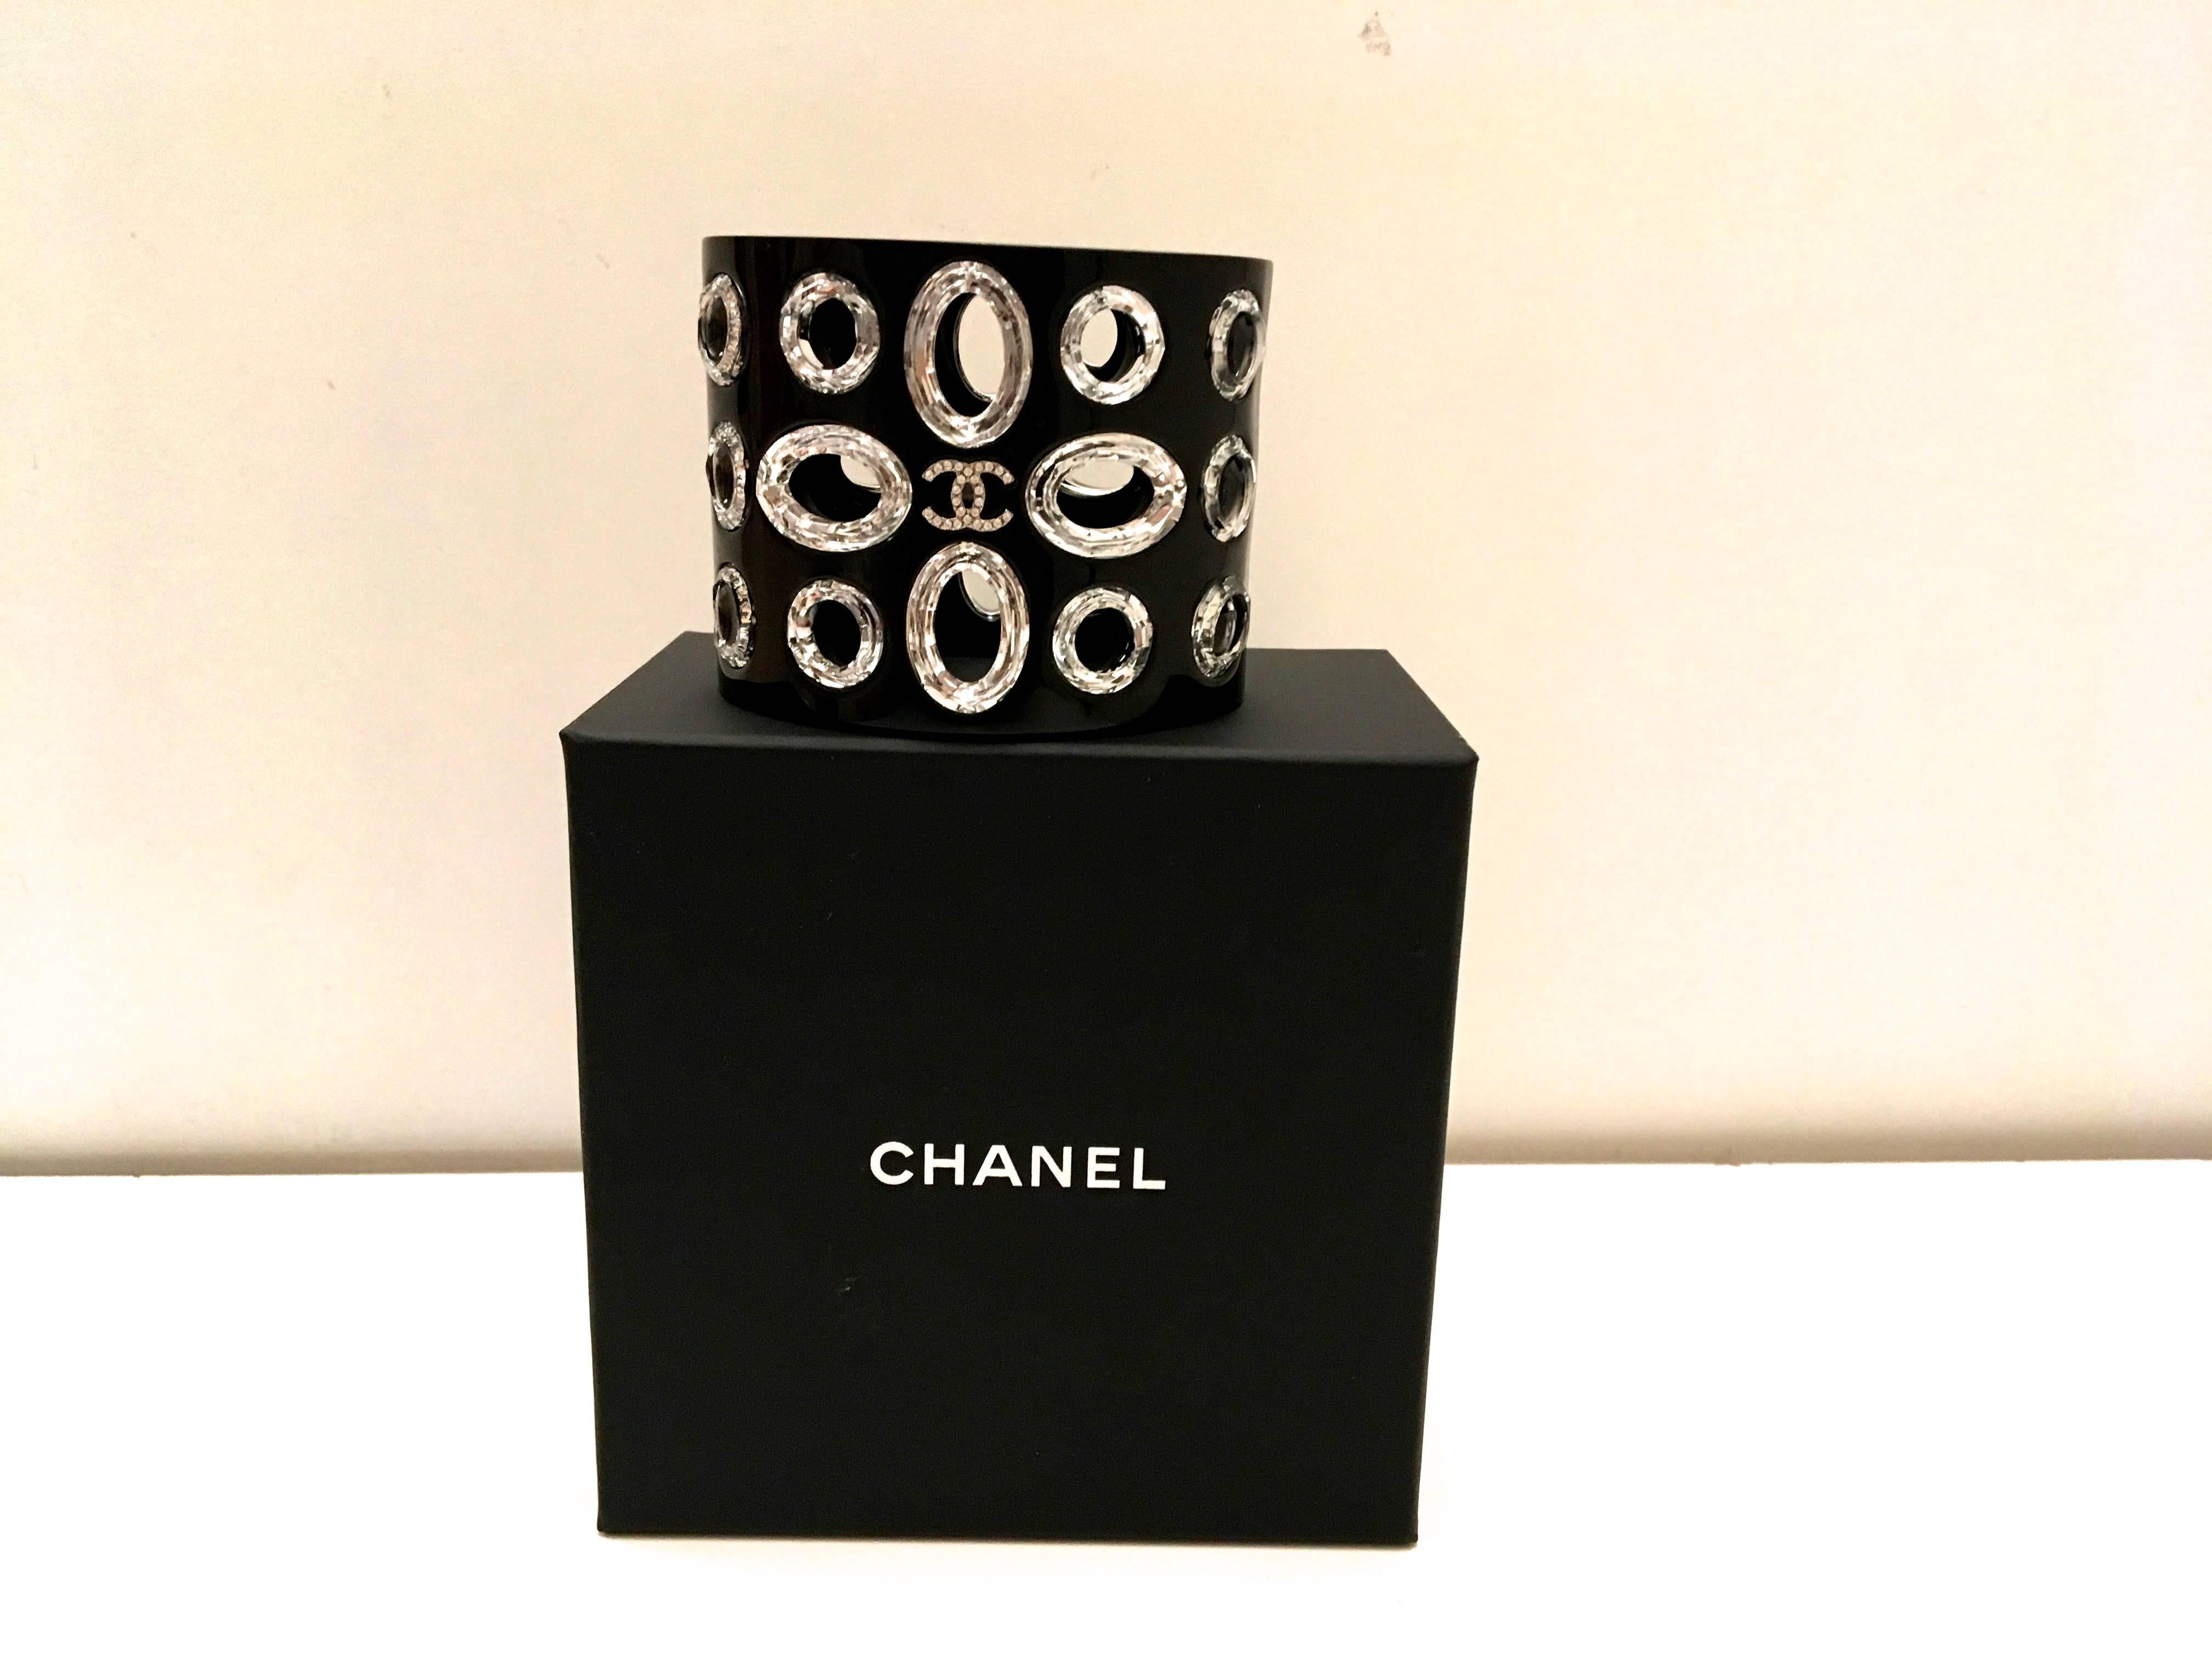 Chanel Cuff Bracelet - Lucite and Swarovski Crystals For Sale 5